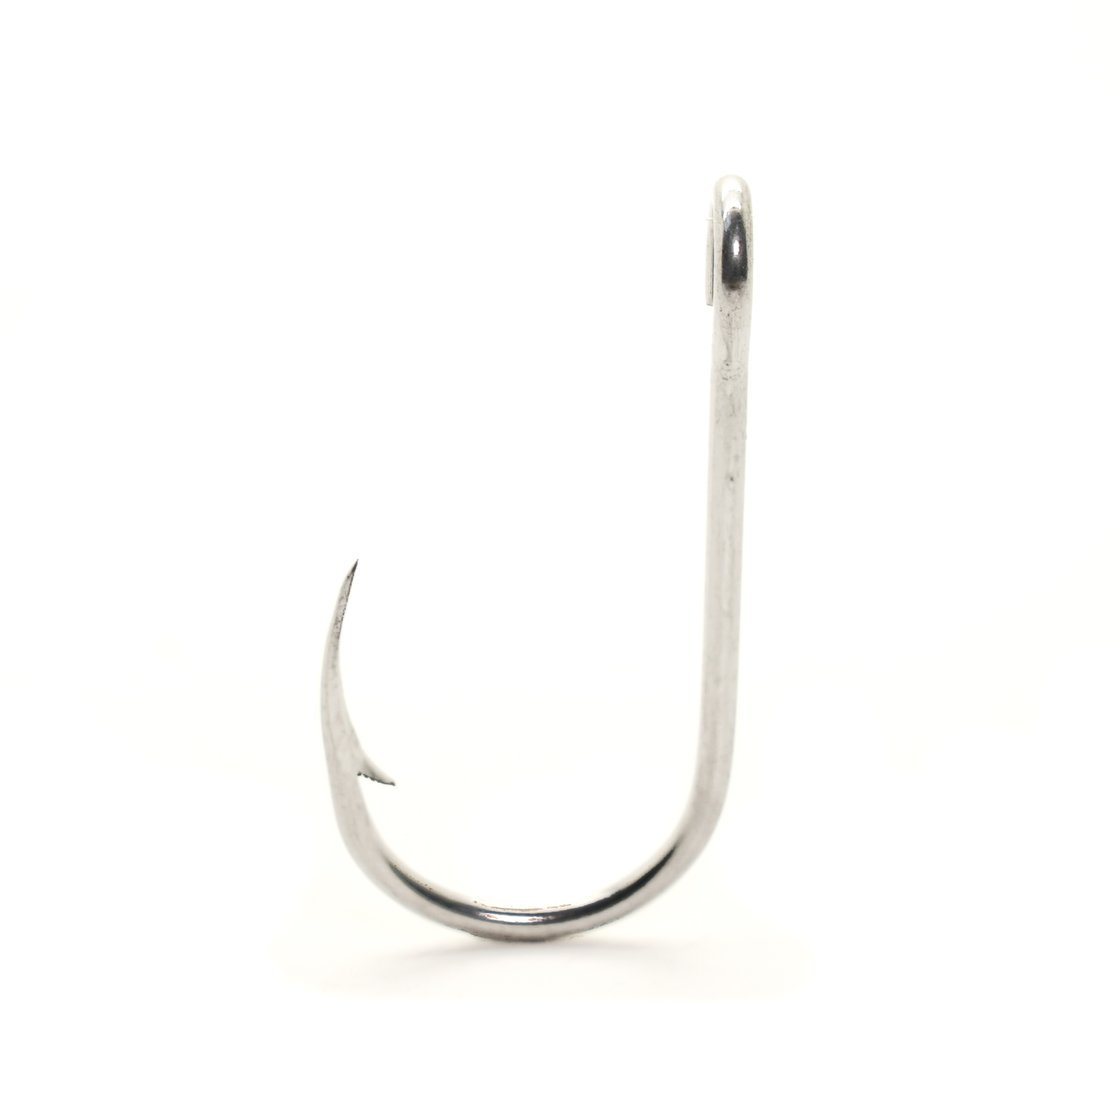 Mustad 95170-SS Salmon Siwash - 3x Strong - Stainless Steel Hooks (Box